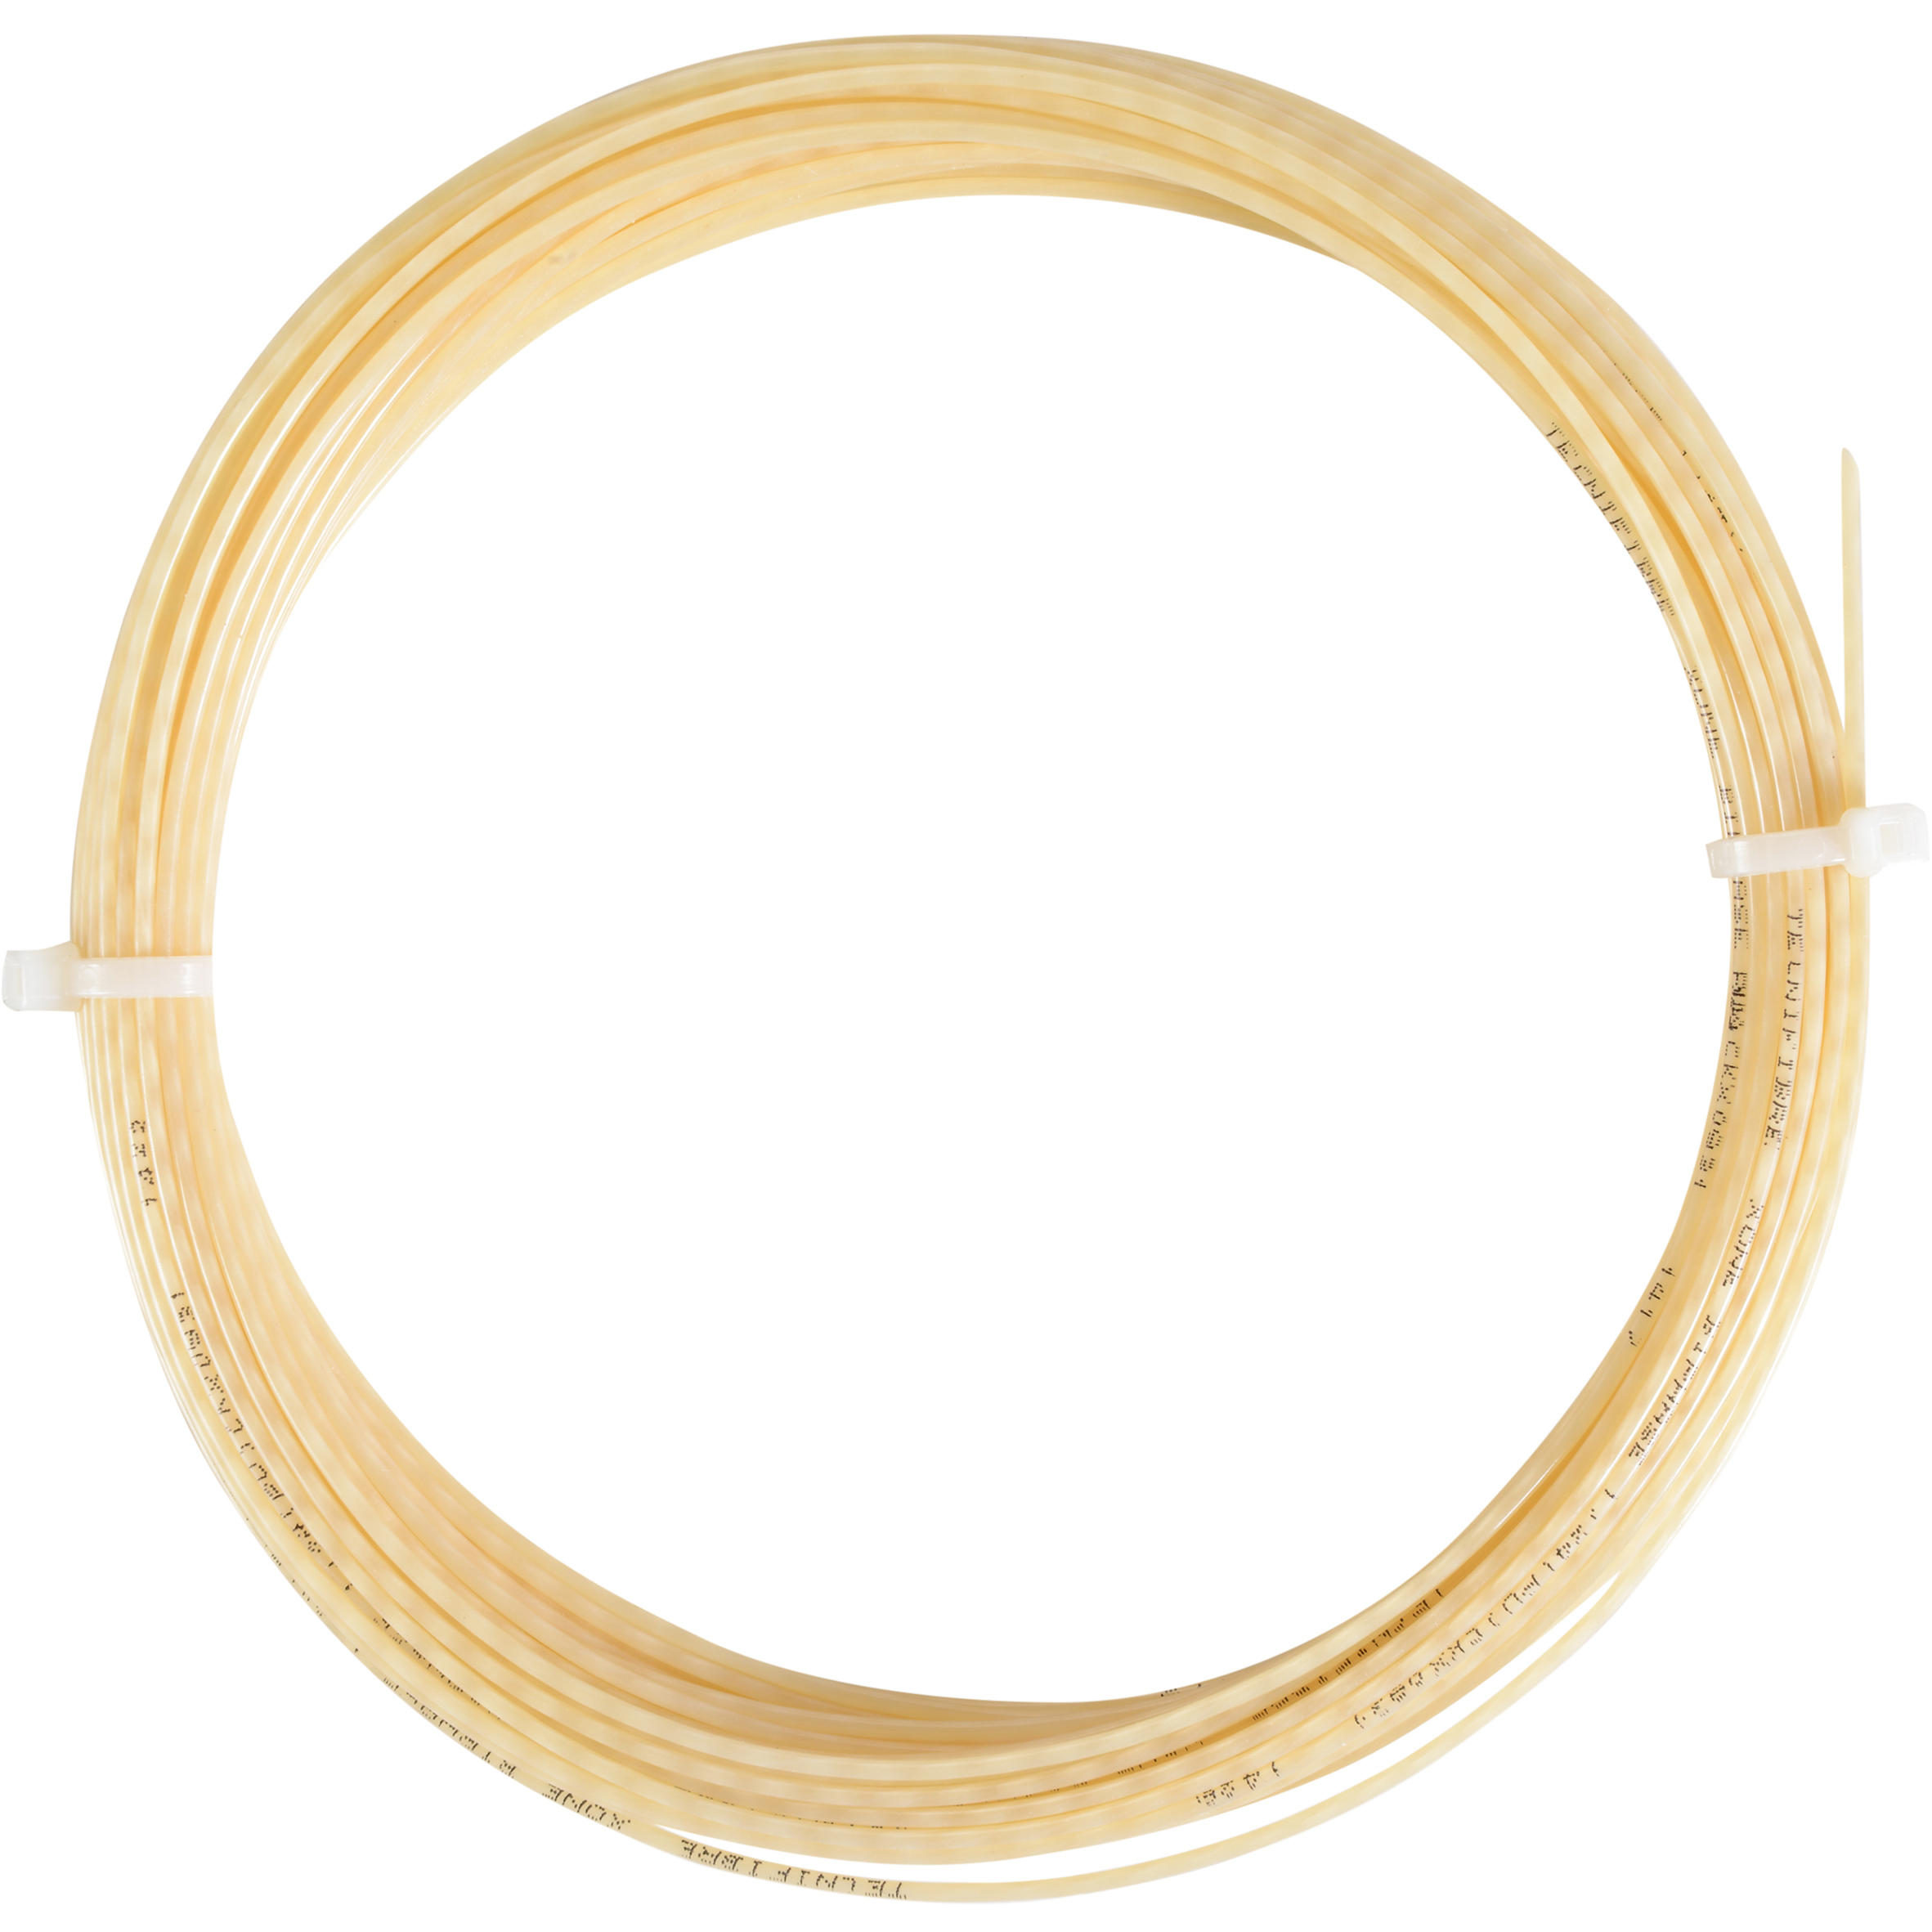 X-One Biphase 1.24 mm Multifilament Tennis String - Natural ...